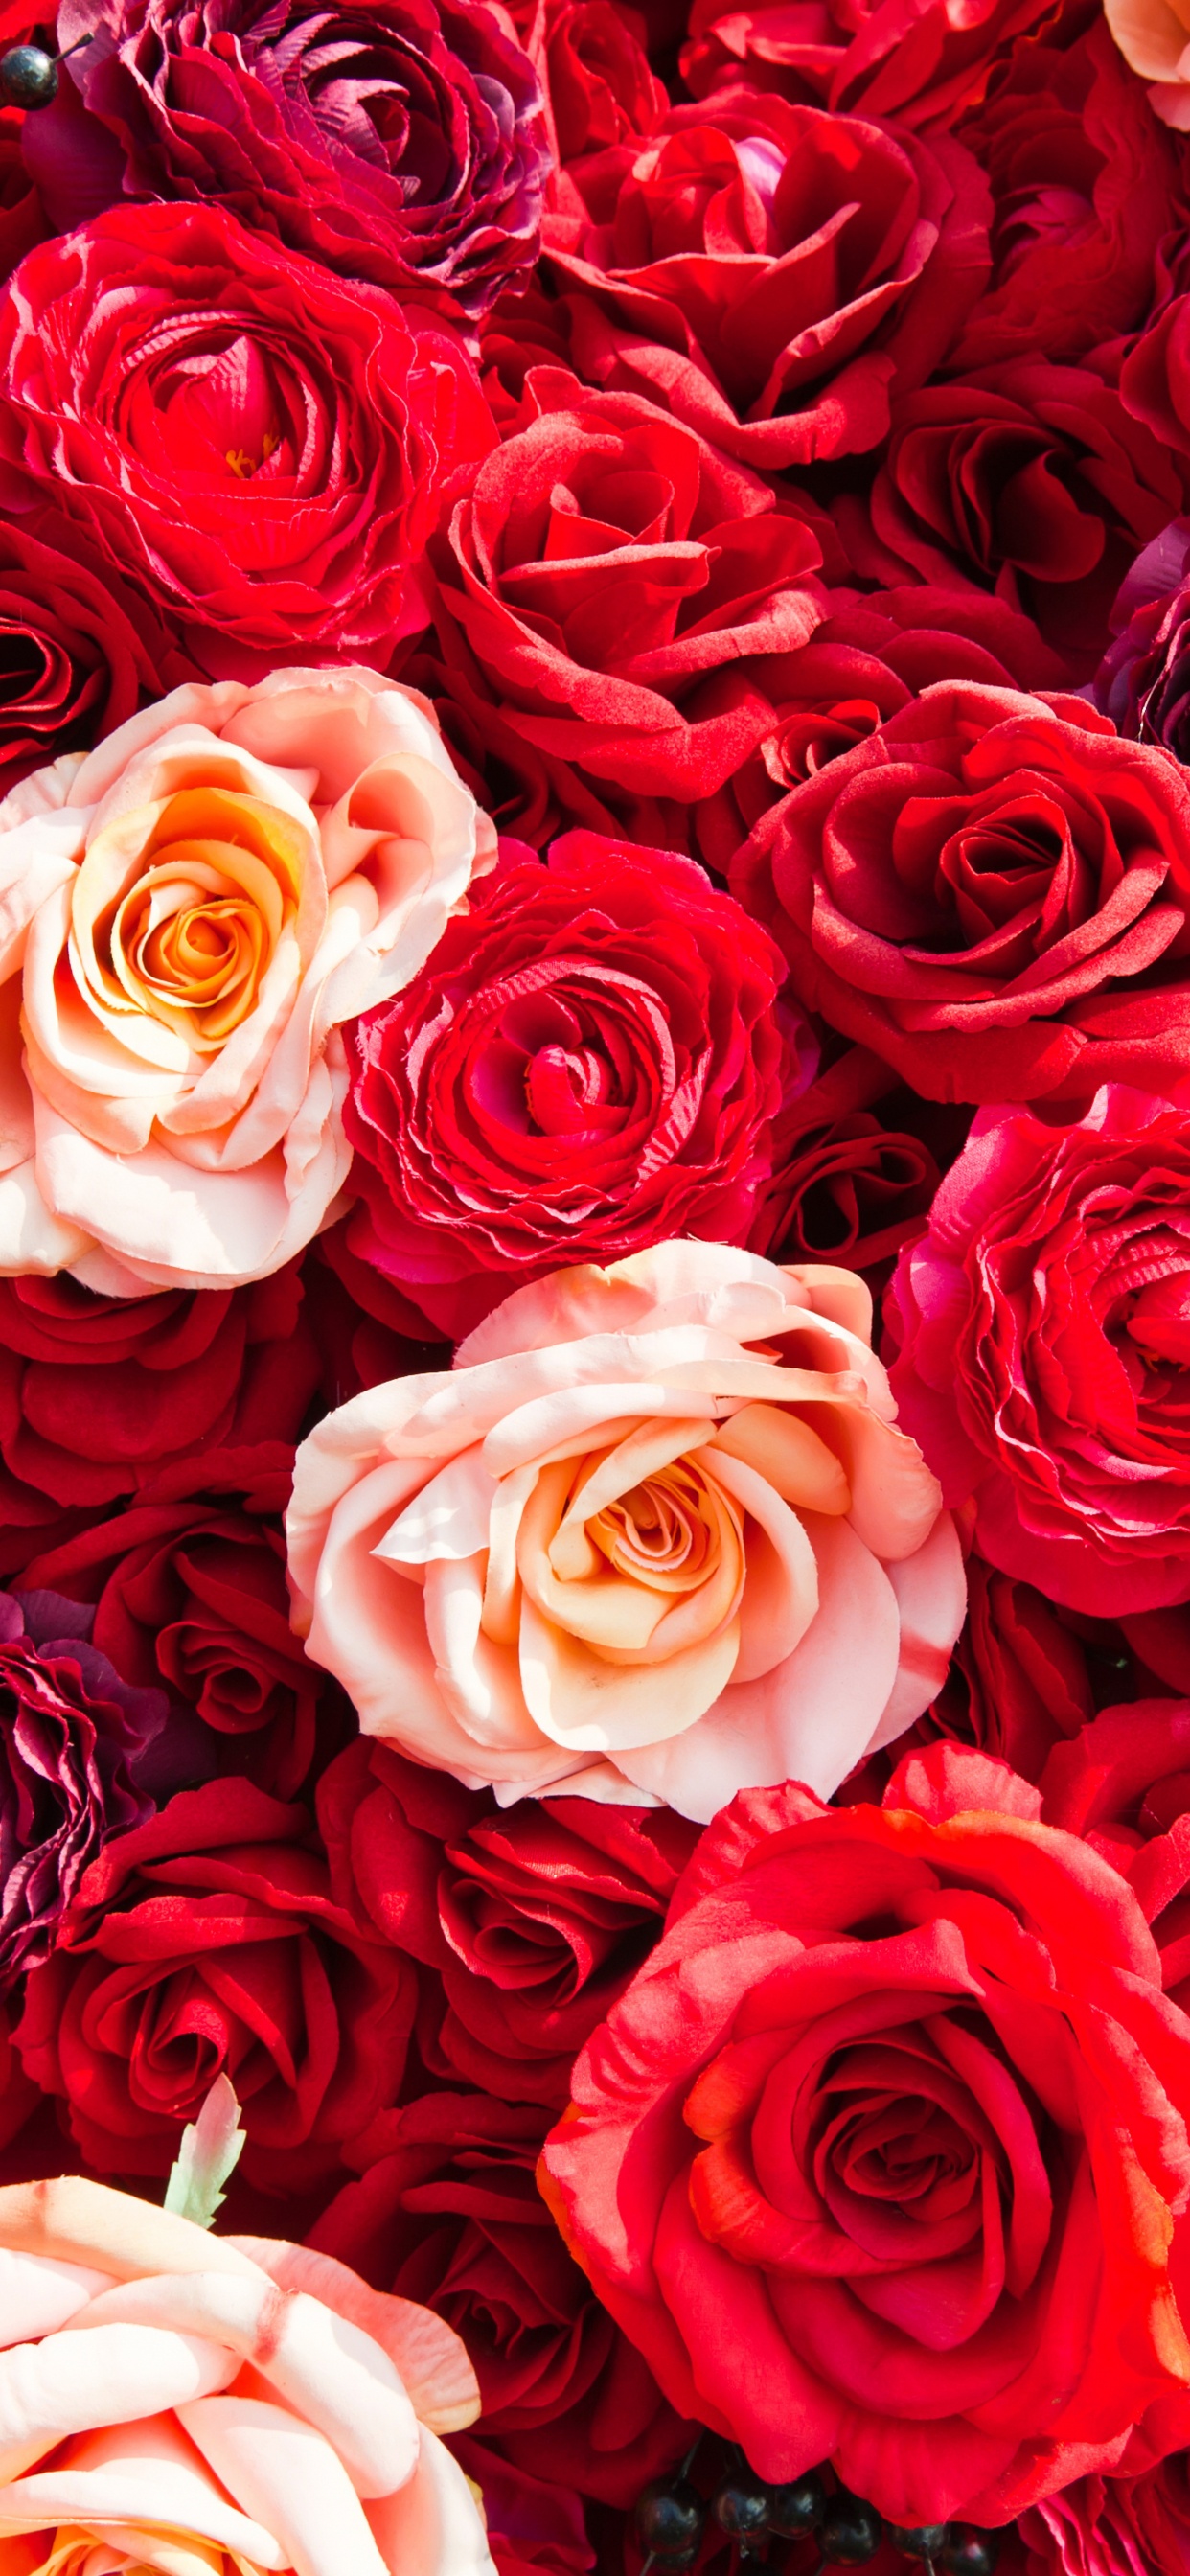 Red and White Roses Bouquet. Wallpaper in 1242x2688 Resolution